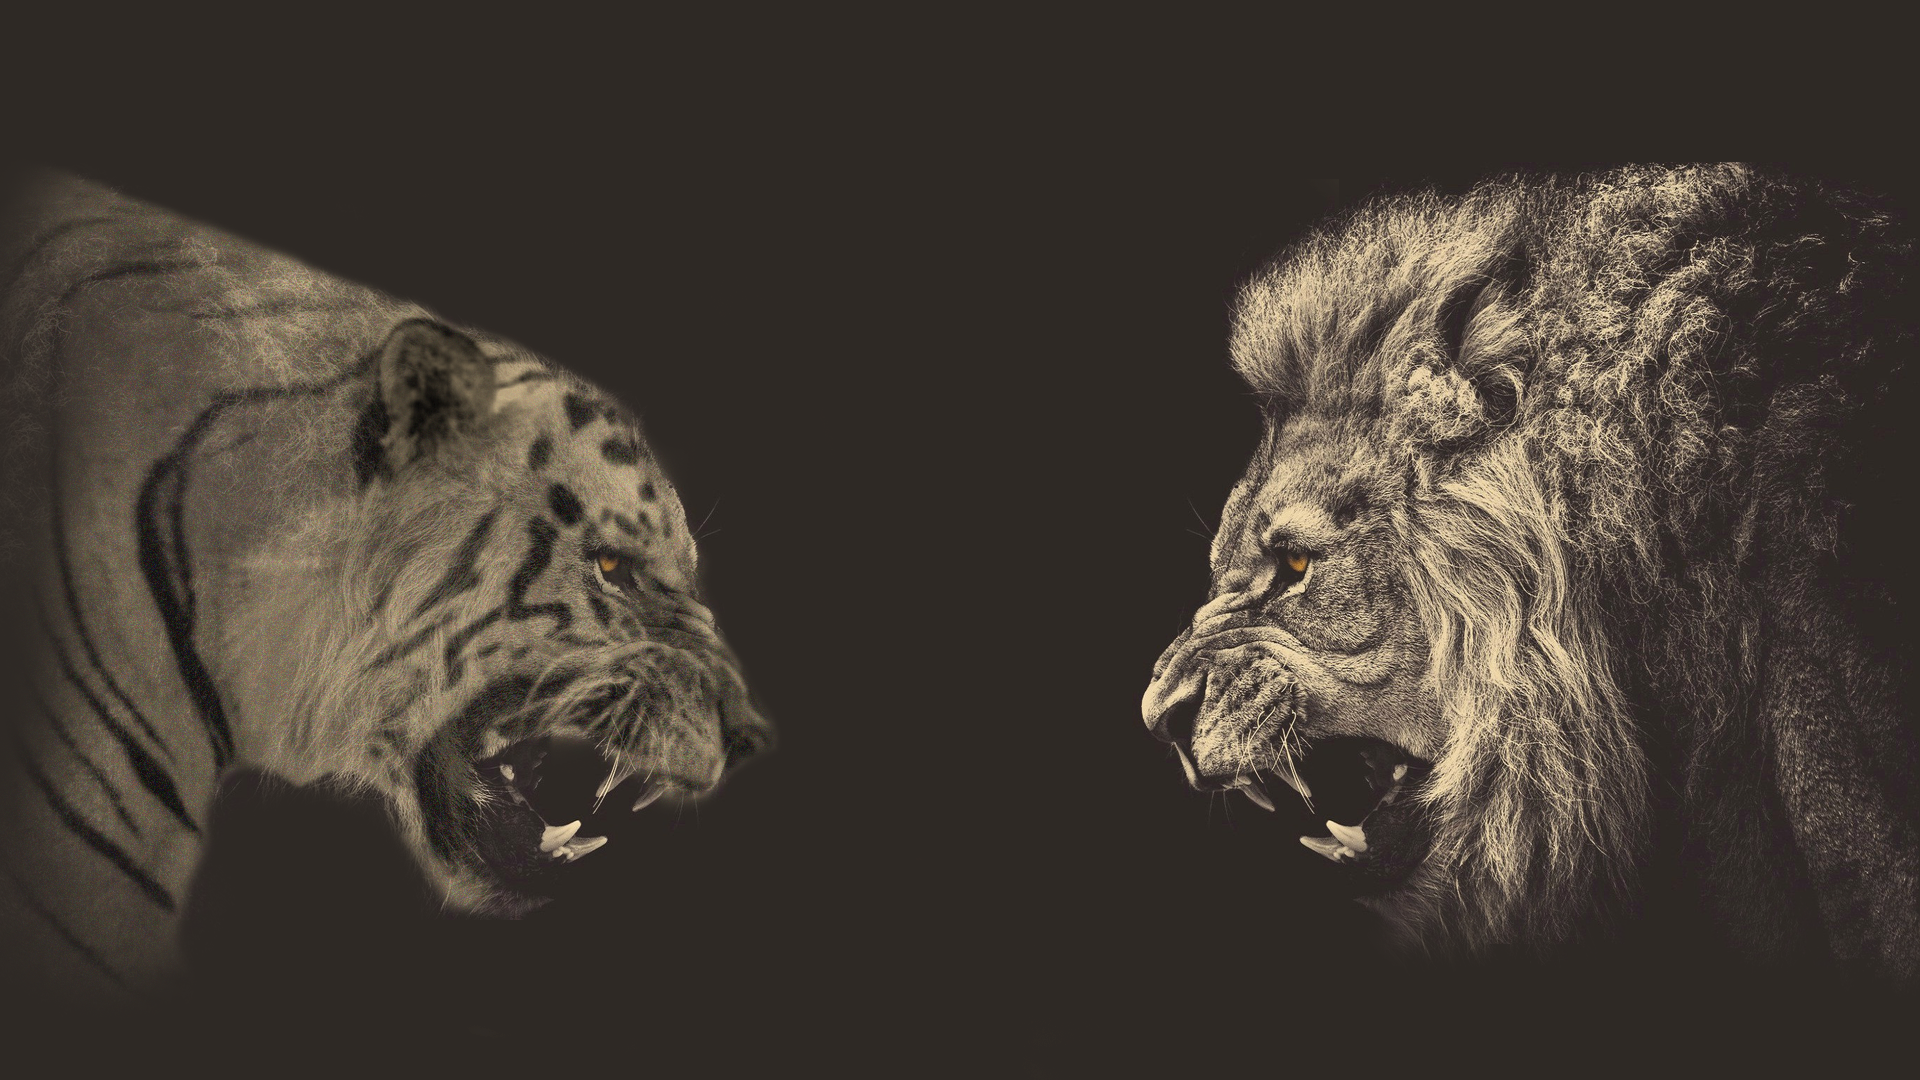 Meeting a lion and a tiger, gray background wallpapers and images ...